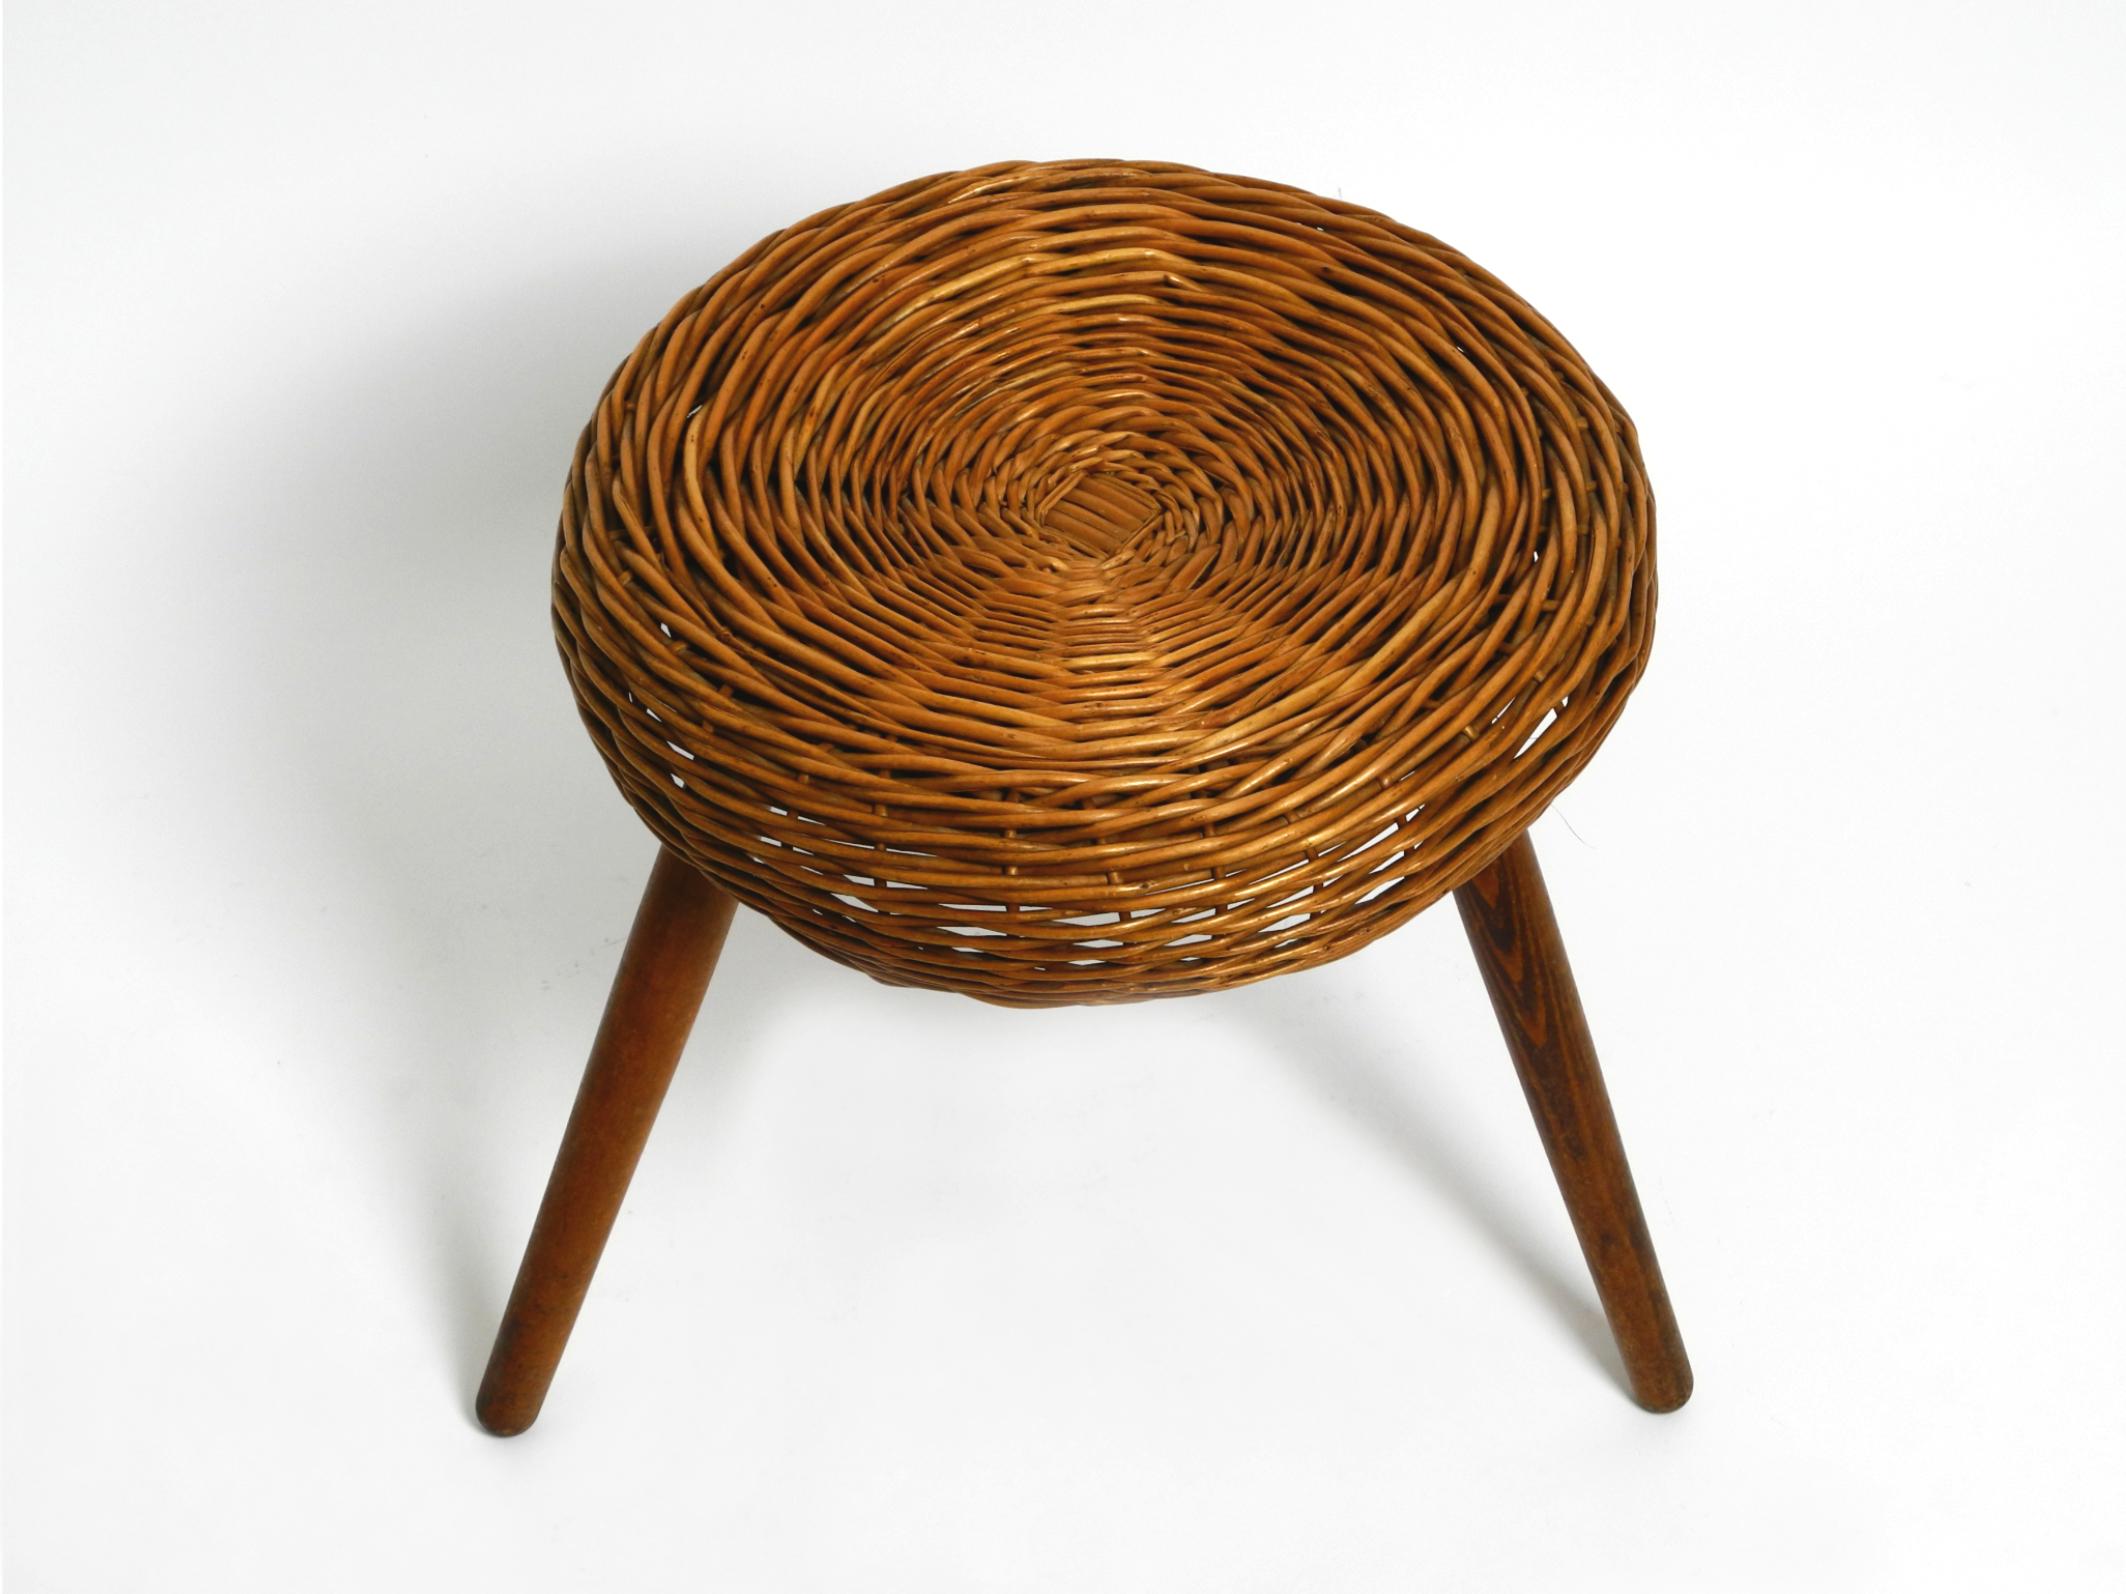 Original large Mid Century Modern rattan stool with wooden legs by Tony Paul In Good Condition For Sale In München, DE